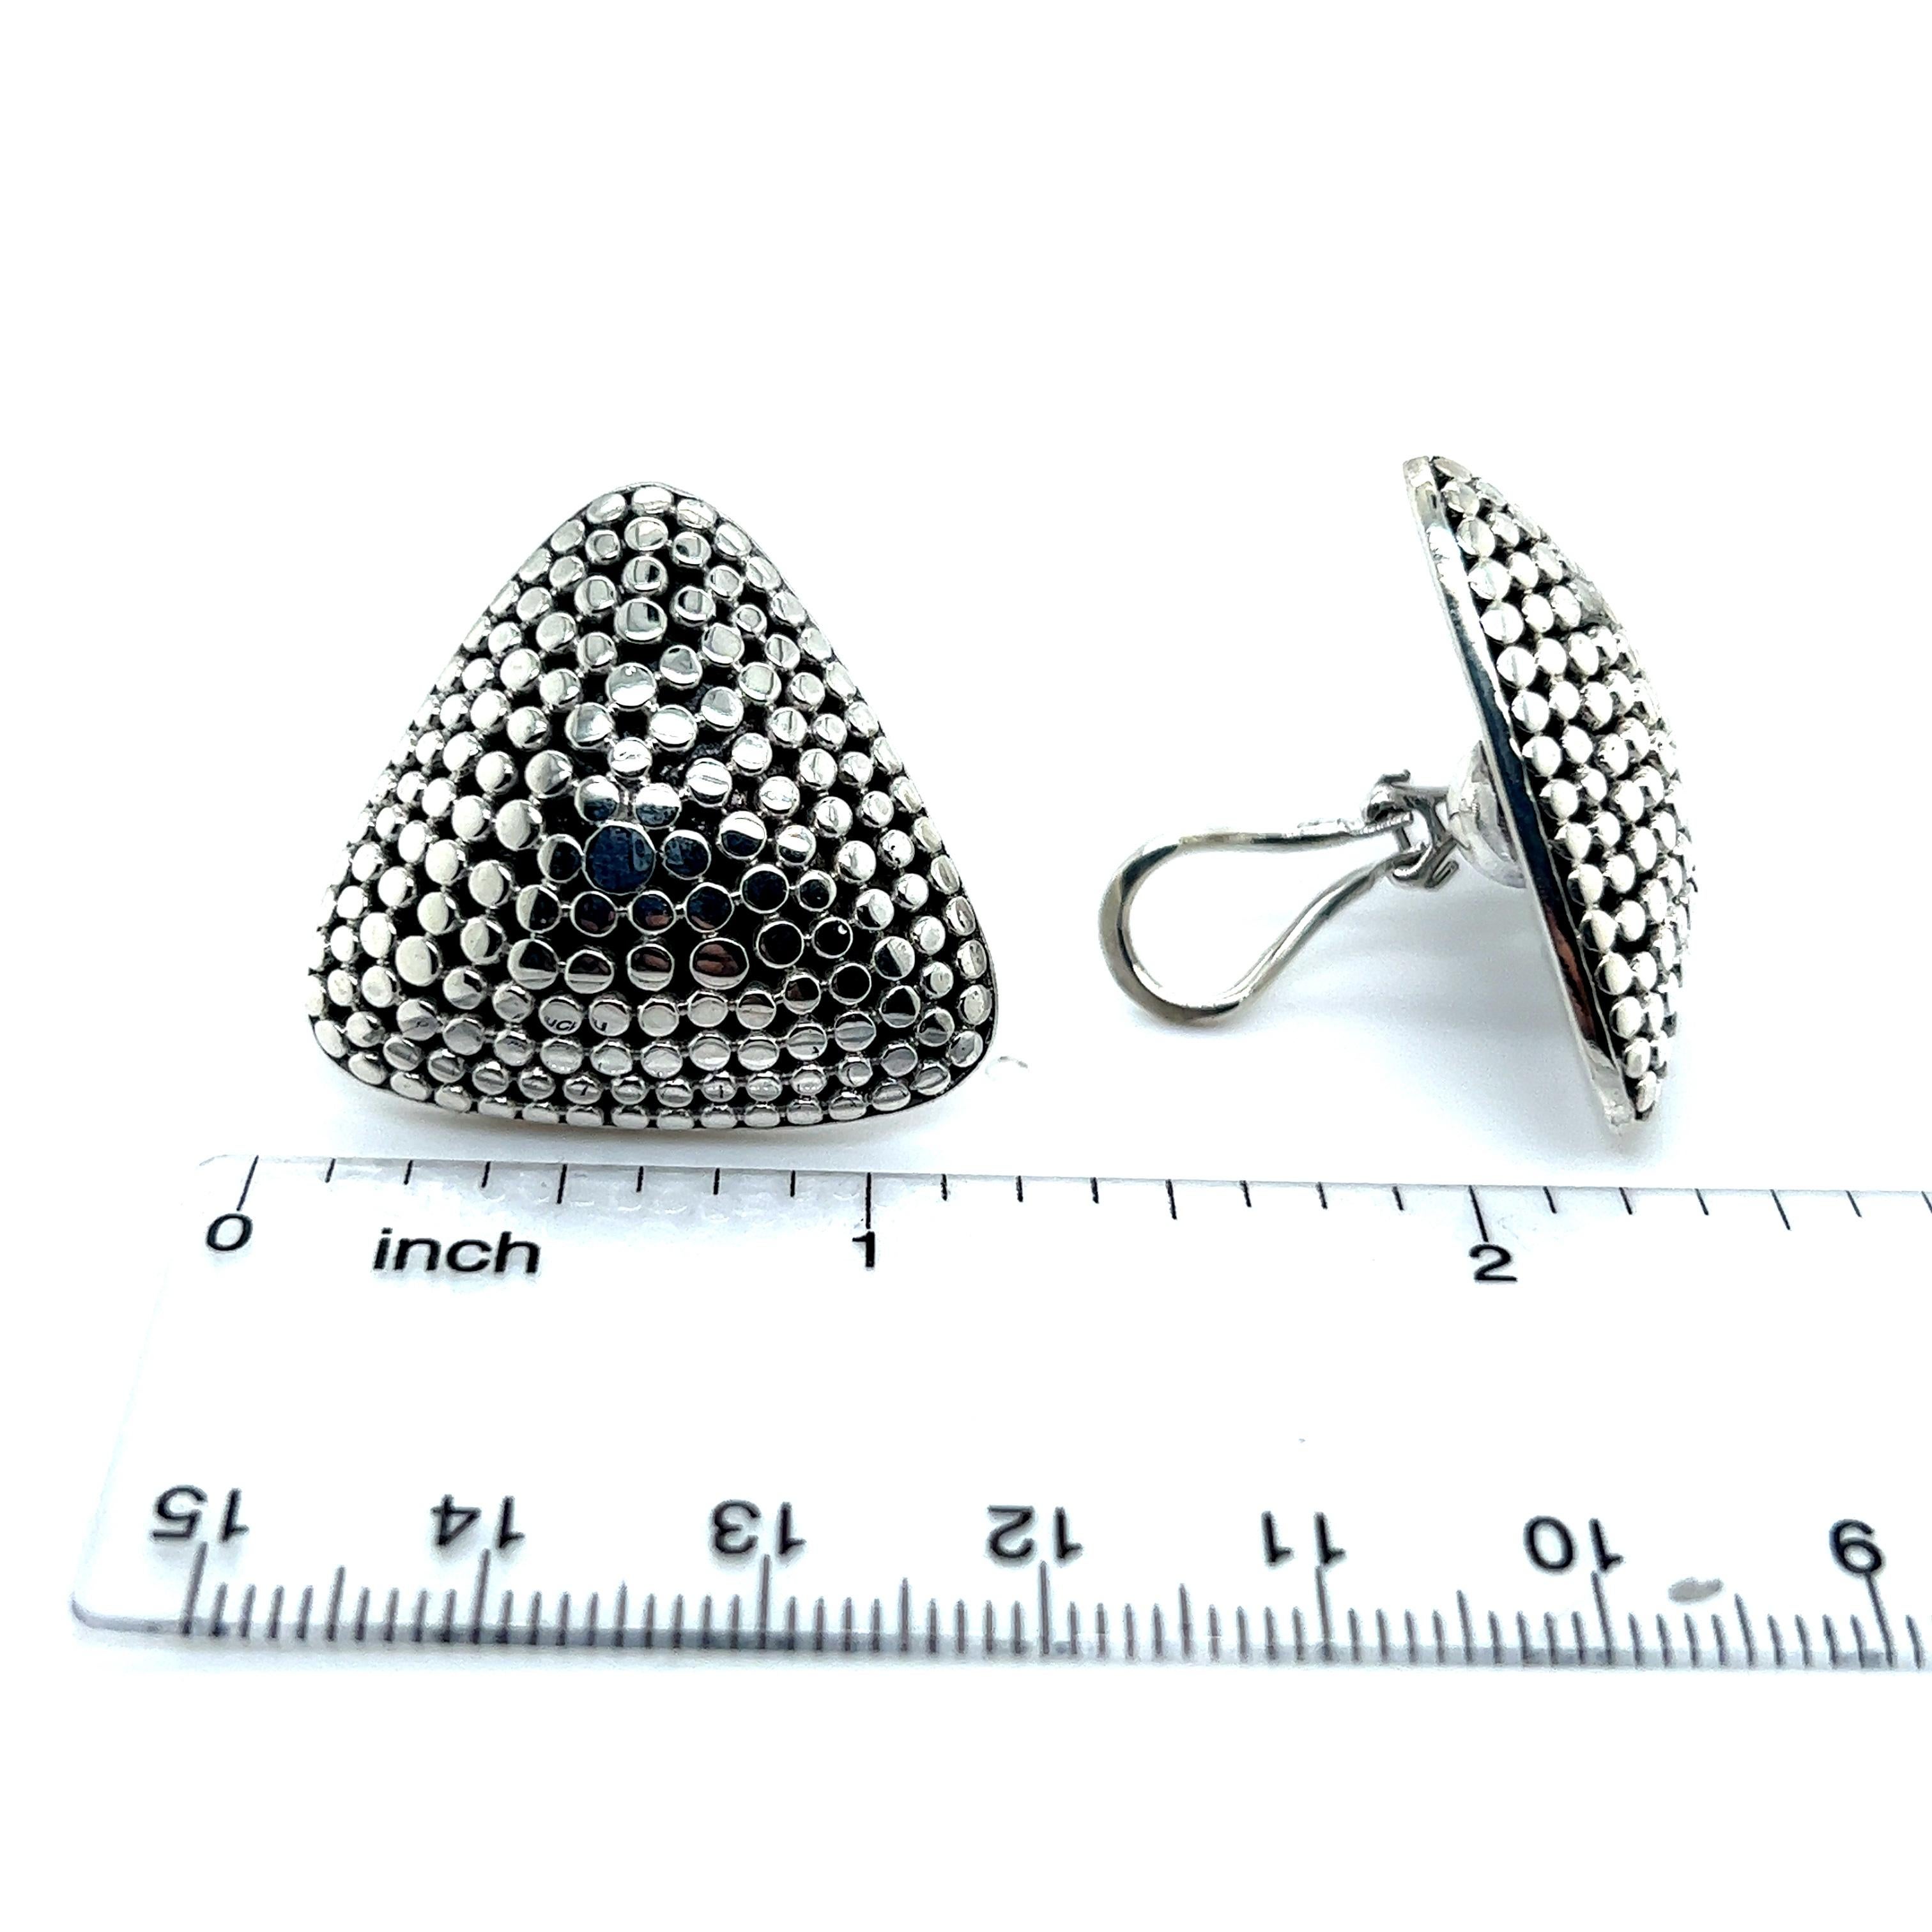 John Hardy Estate Clip-on Triangle Dot Earrings Silver JH49

TRUSTED SELLER SINCE 2002

PLEASE SEE OUR HUNDREDS OF POSITIVE FEEDBACKS FROM OUR CLIENTS!!

FREE SHIPPING!!

DETAILS
Style: Triangle Dot Earrings
Earrings: Clip-on
Weight: 27 Grams
Metal: